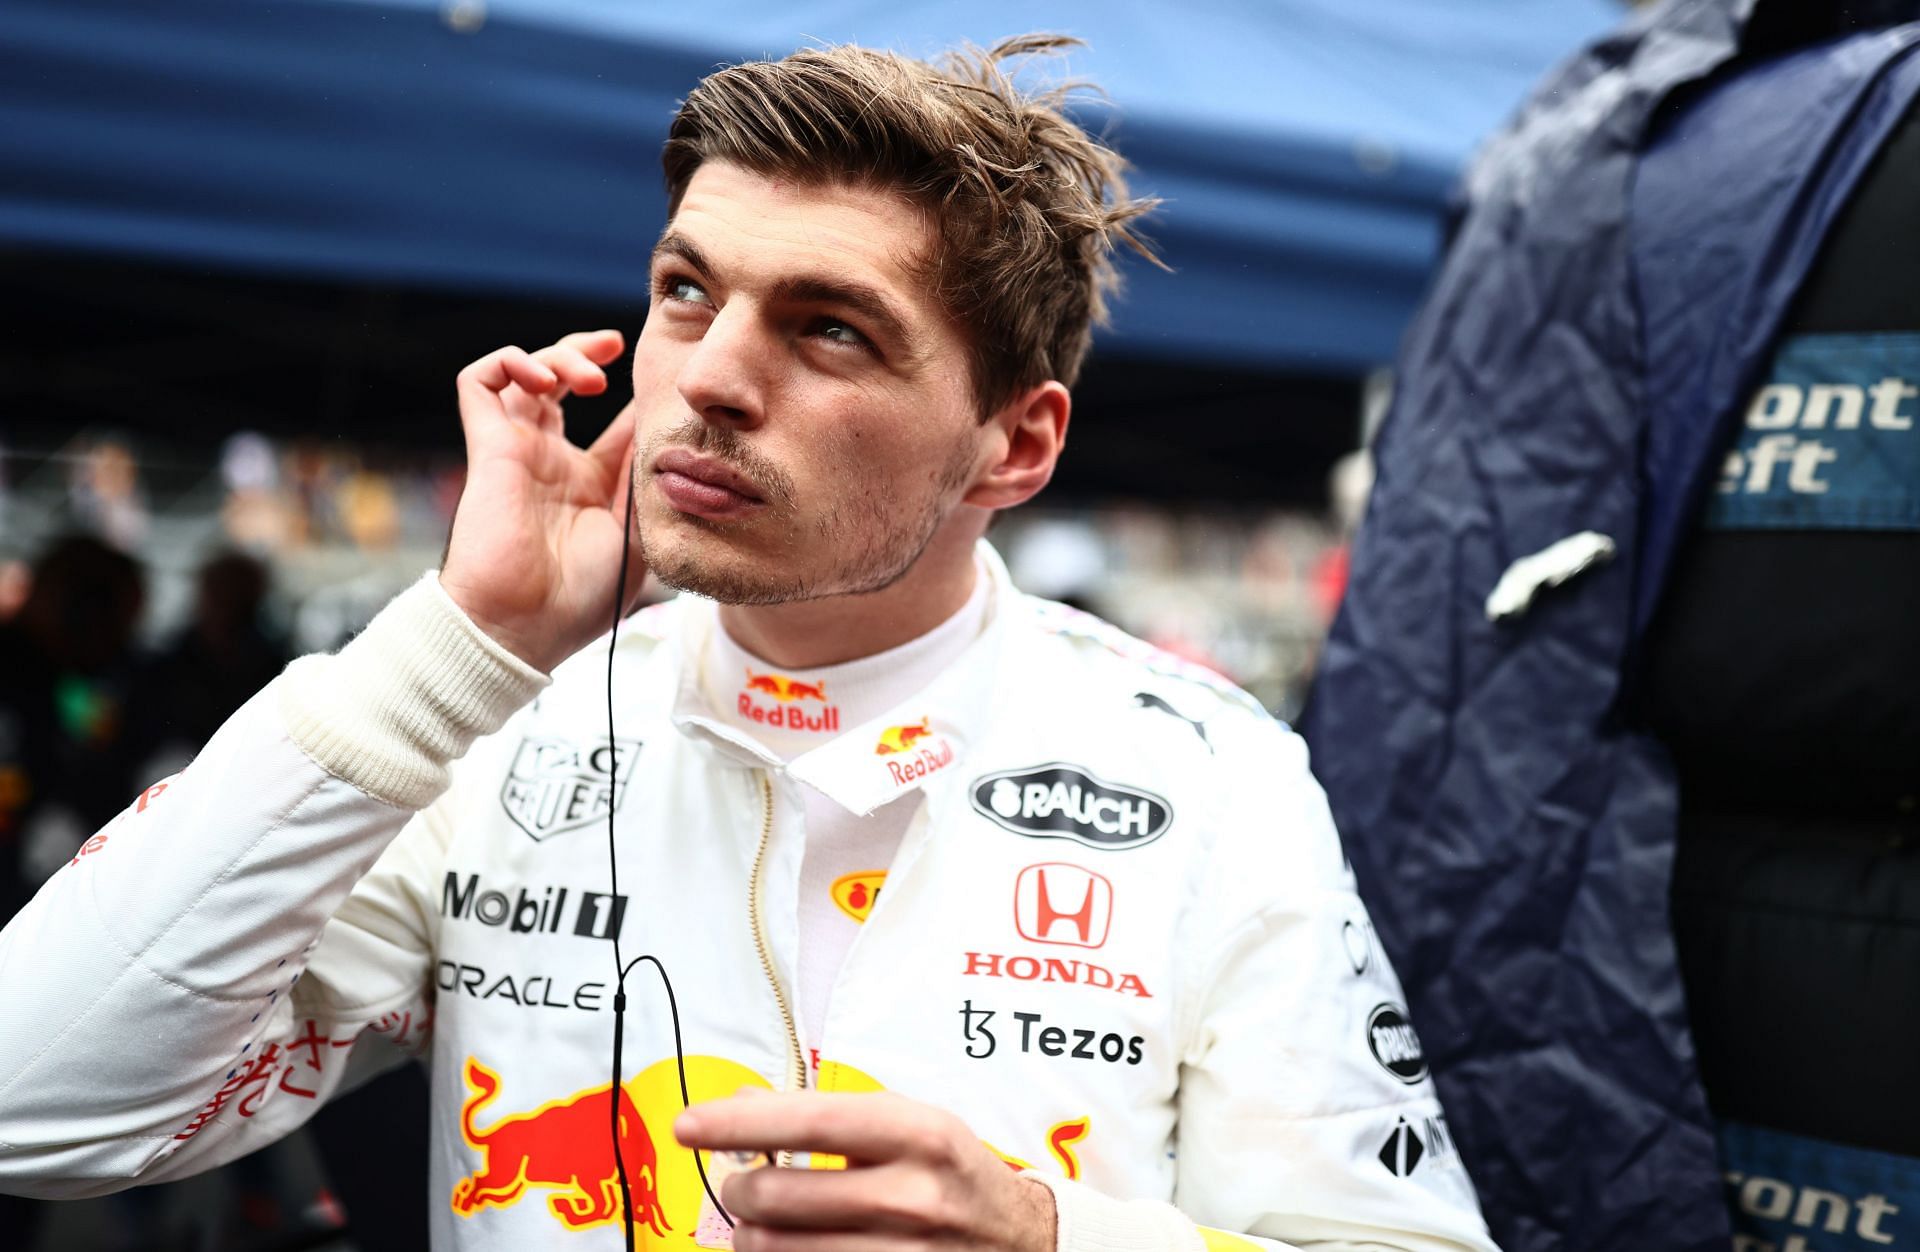 Max Verstappen has adopted a pragmatic approach toward his title battle this season. Photo: Mark Thompson/Getty Images